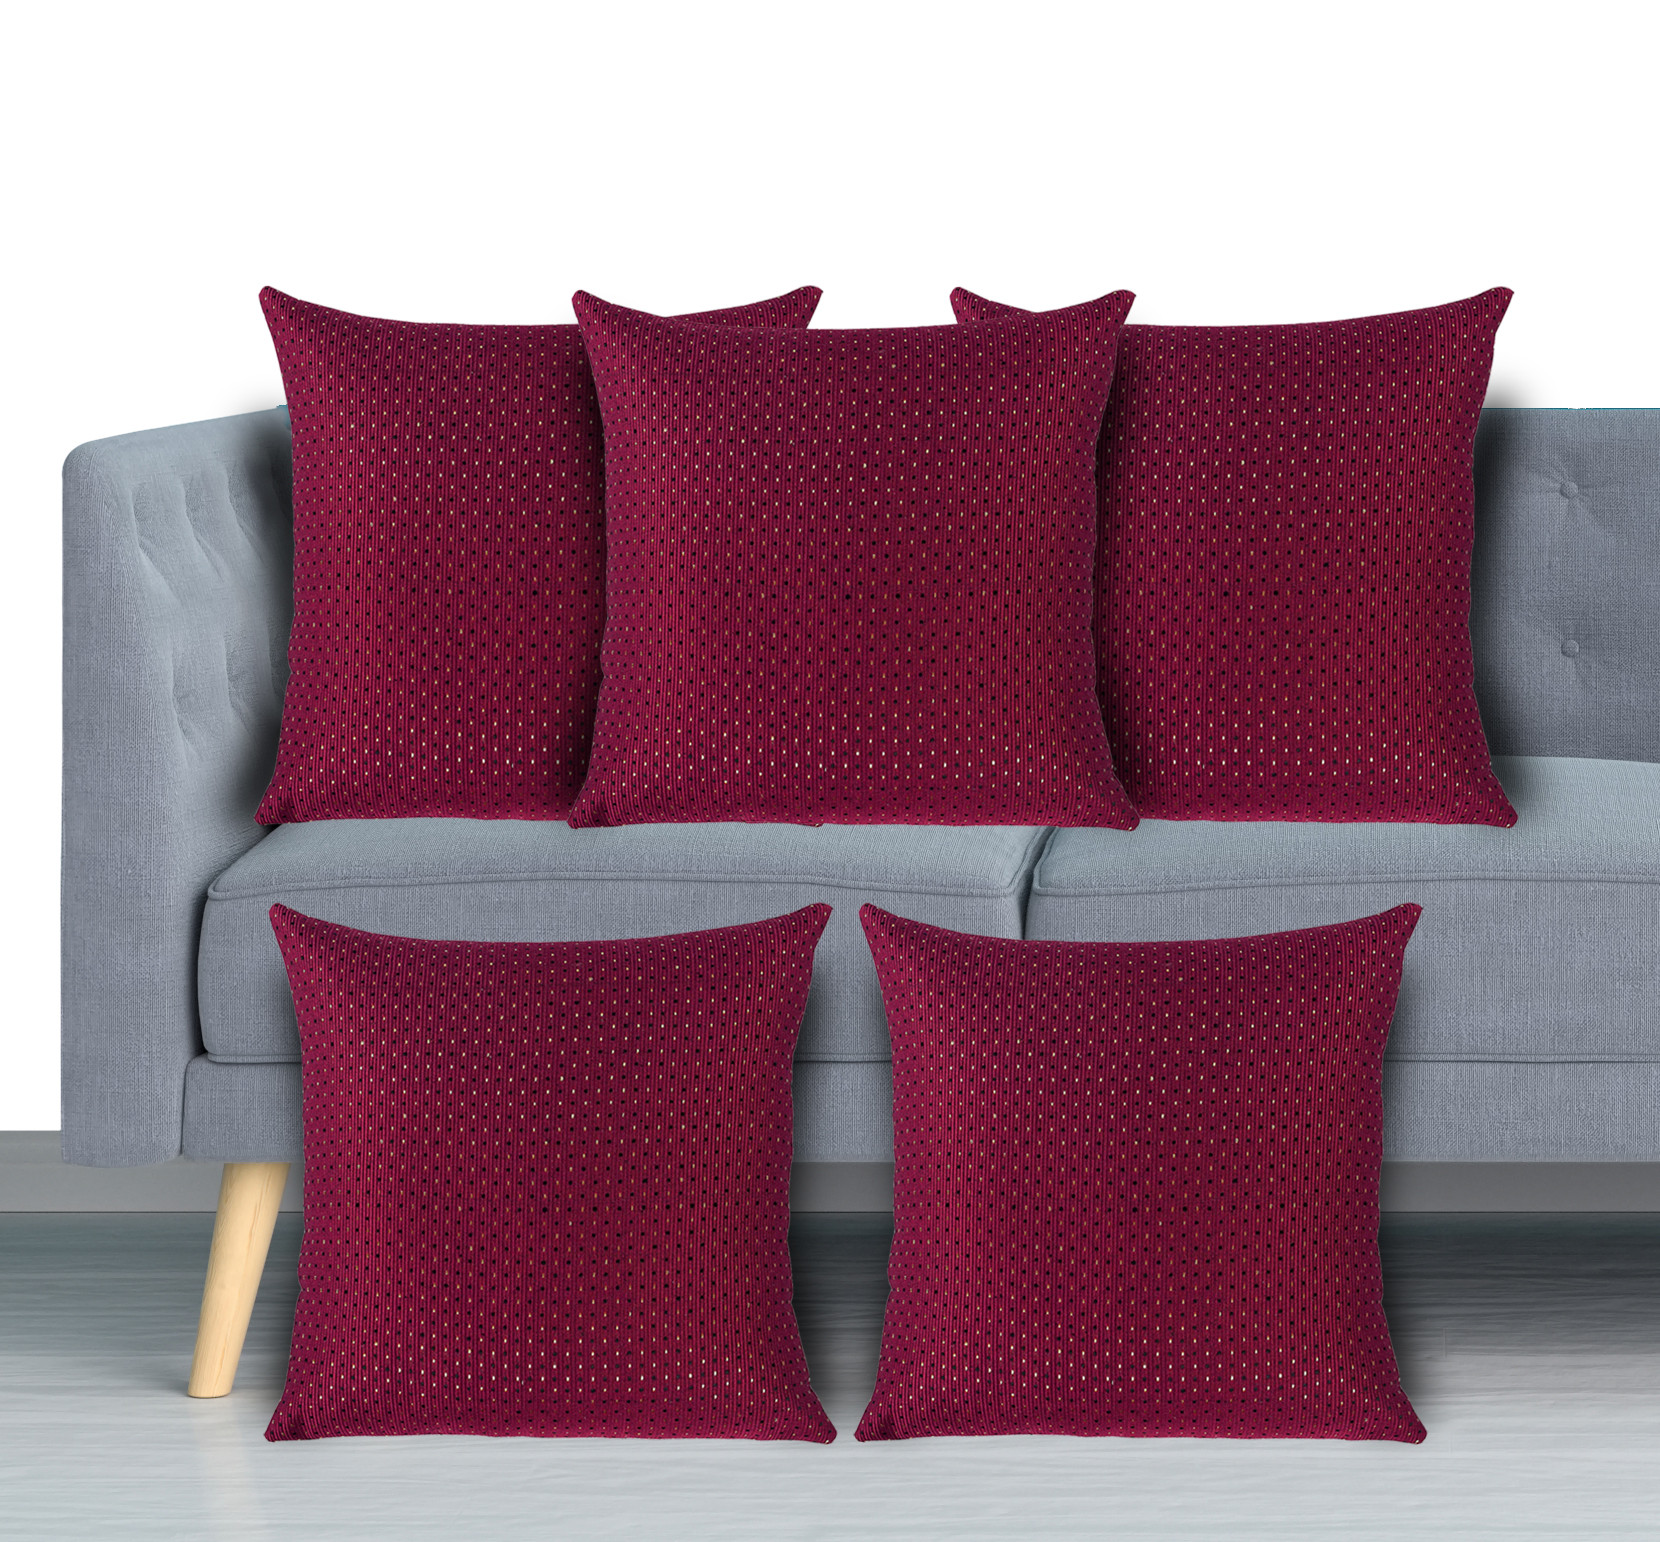 Kuber Industries Velvet Dot Printed Soft Decorative Square Throw Pillow Cover, Cushion Covers, Pillow Case For Sofa Couch Bed Chair 16x16 Inch-(Maroon)